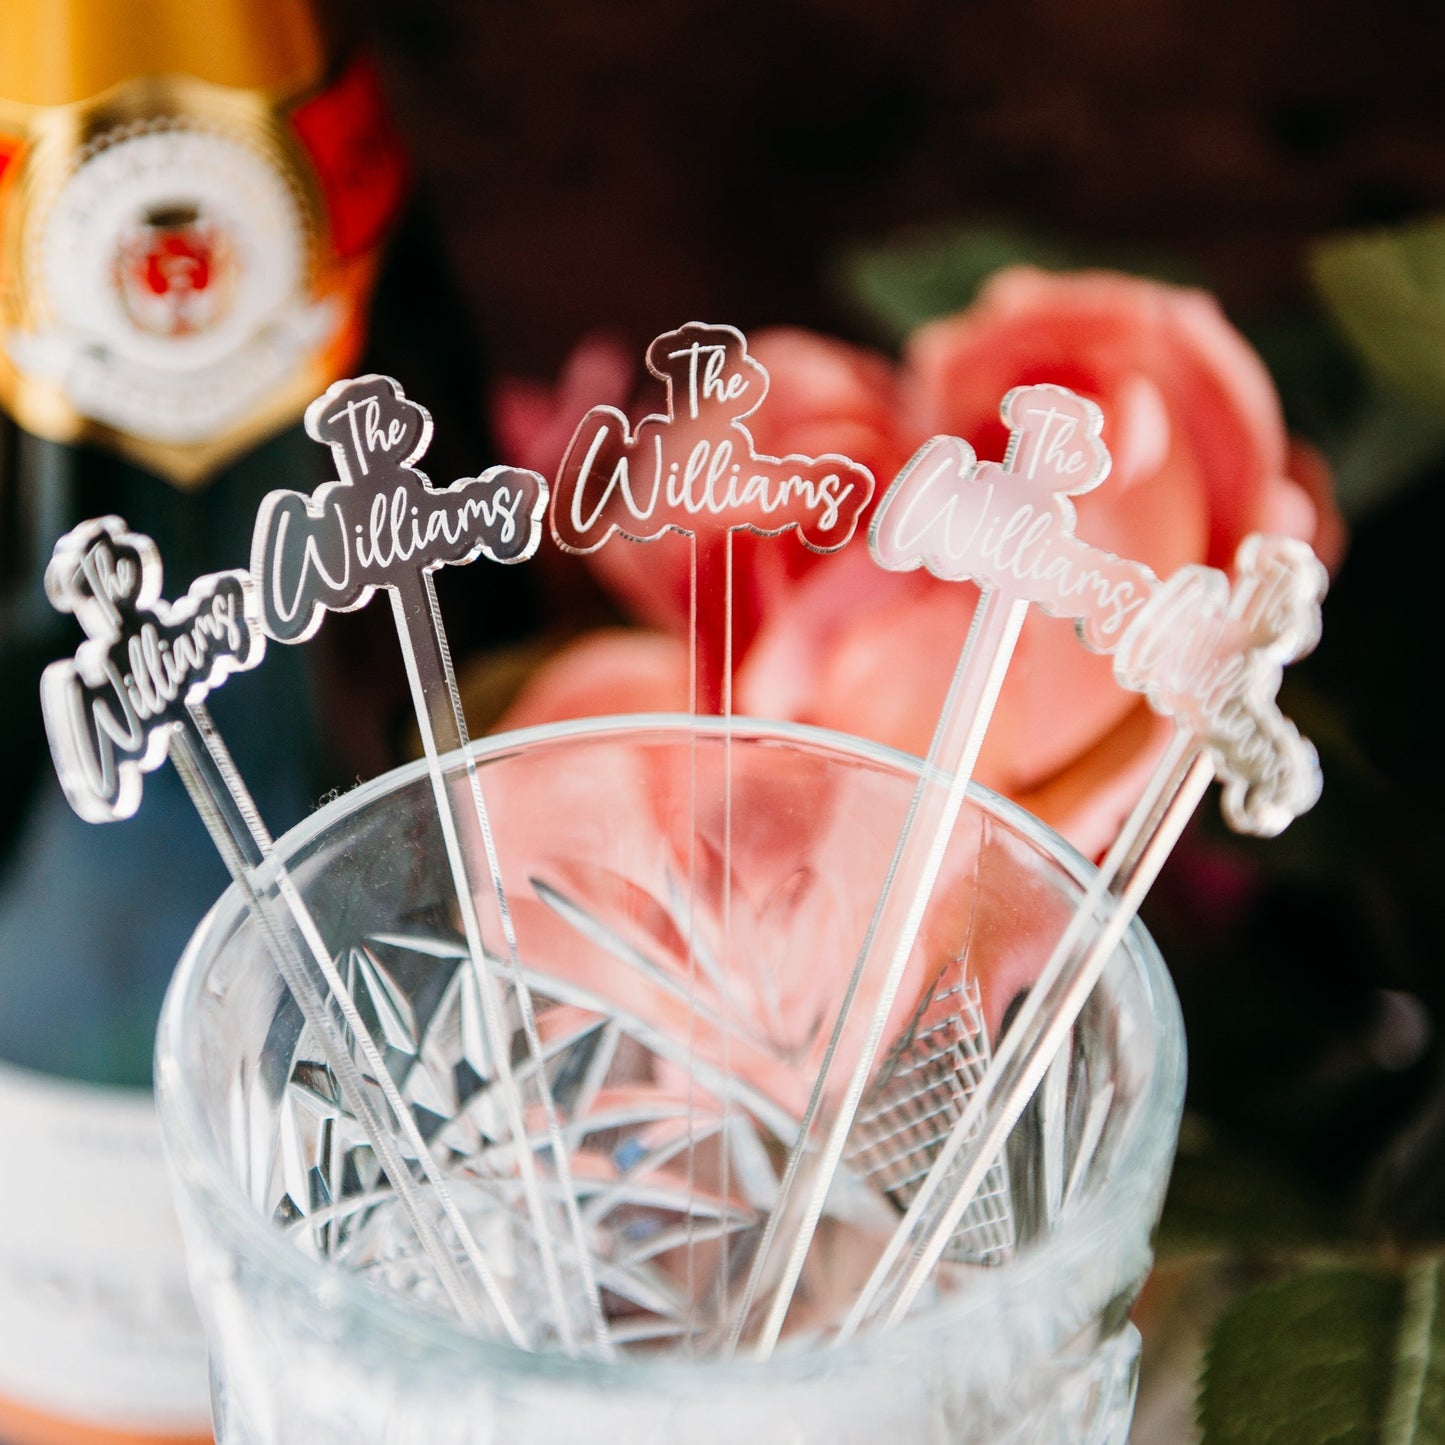 offset last name colored acrylic engraved drink stirrers custom wedding drink stirrers personalized acrylic cocktail stir sticks custom drink charm bespoke event swizzle sticks drink topper birthday party last name date celebration